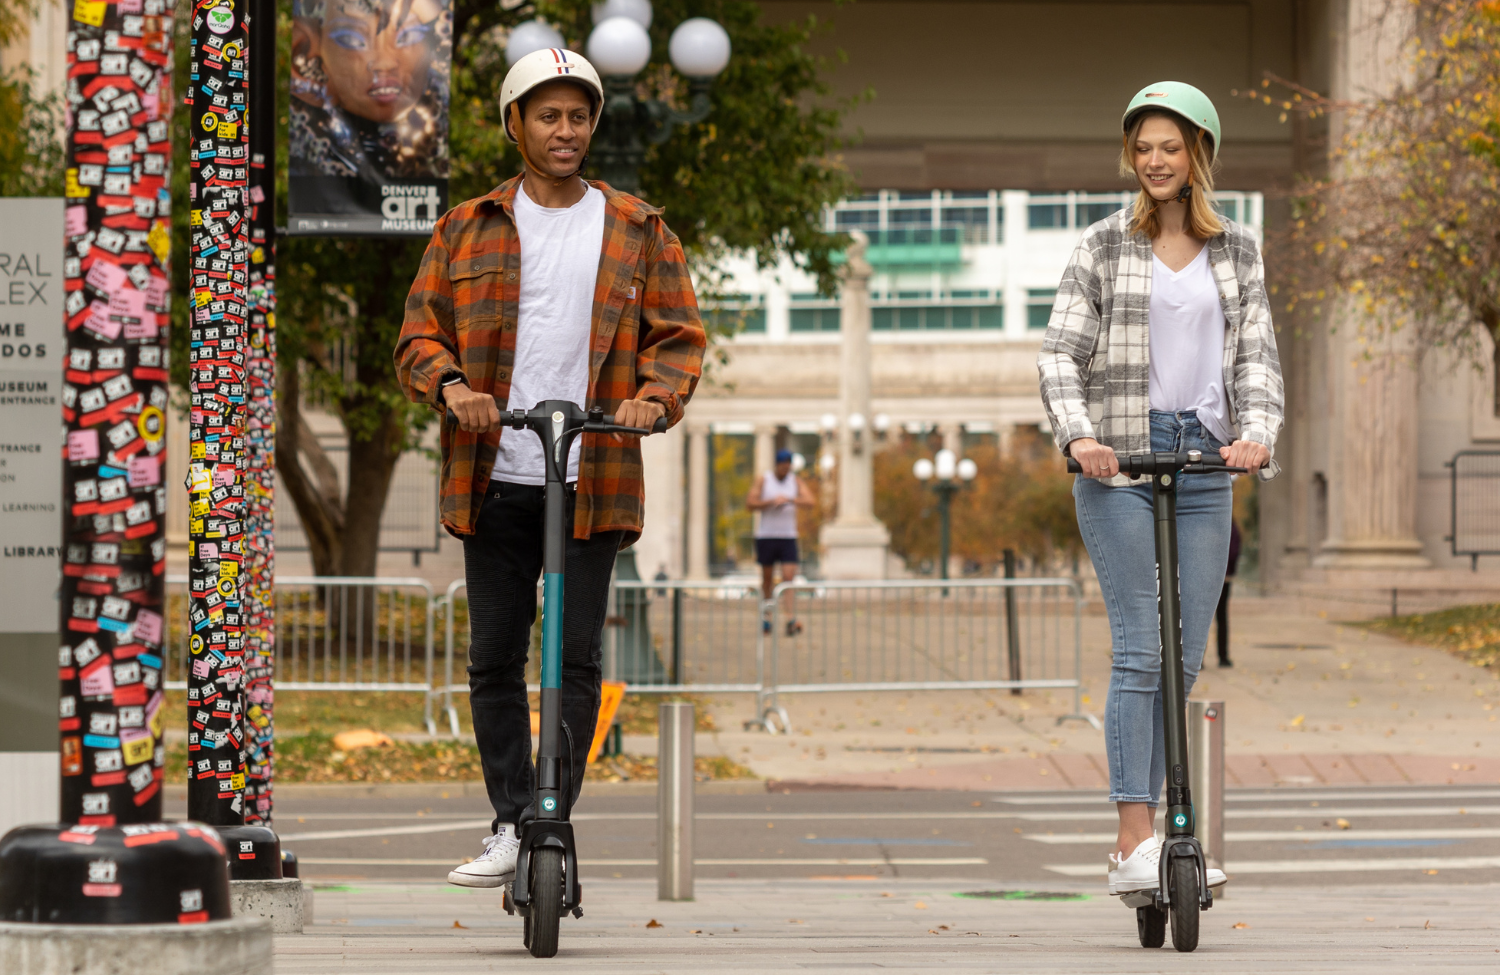 The Best Electric Scooters for College Commuting